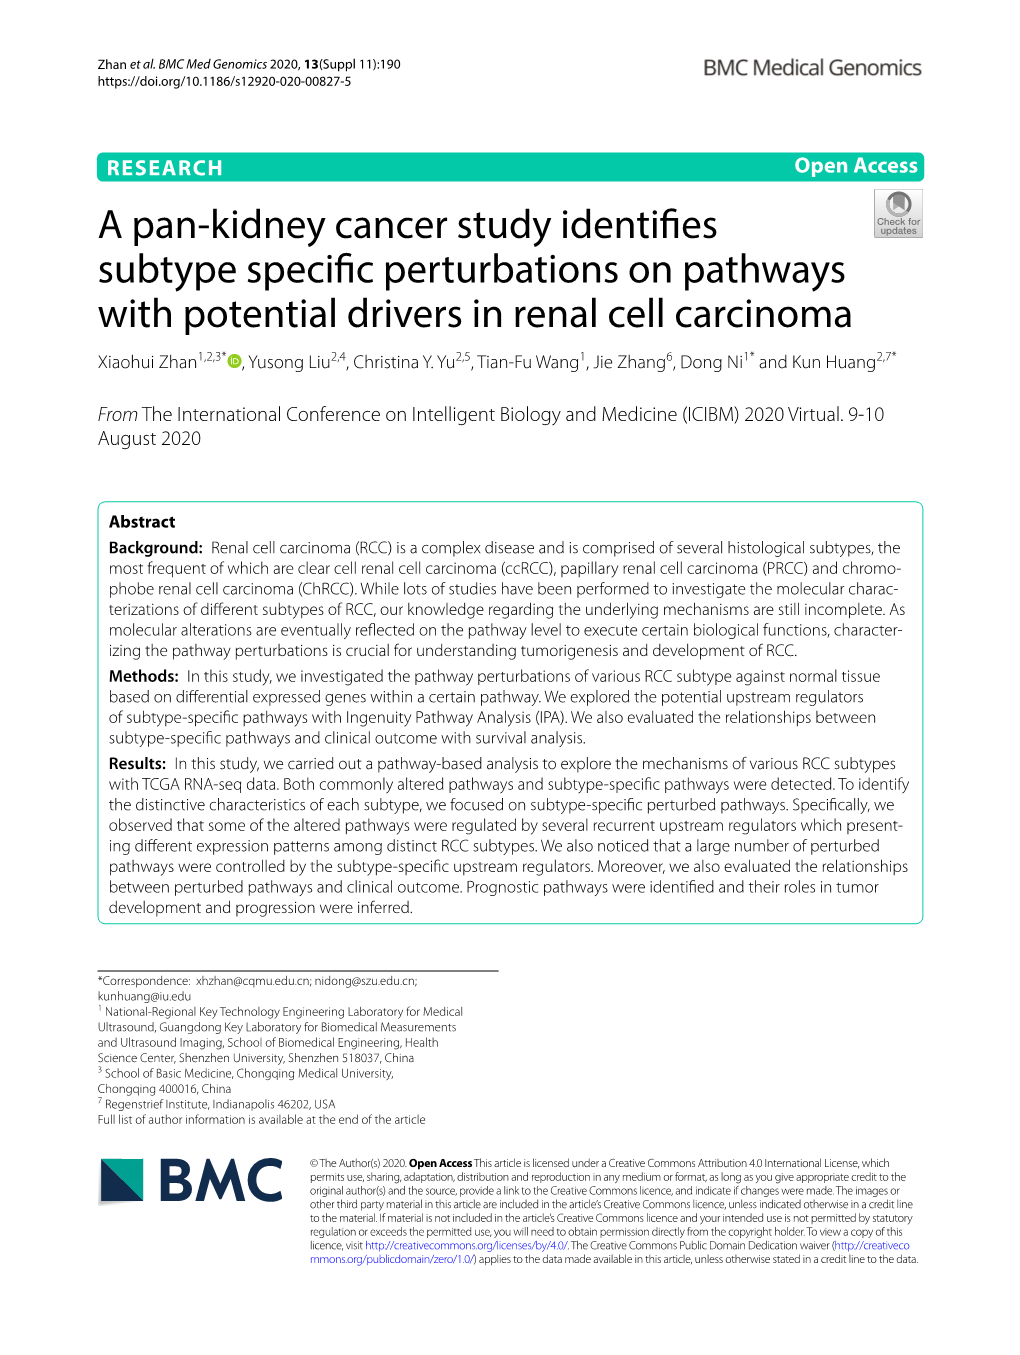 A Pan-Kidney Cancer Study Identifies Subtype Specific Perturbations on Pathways with Potential Drivers in Renal Cell Carcinoma